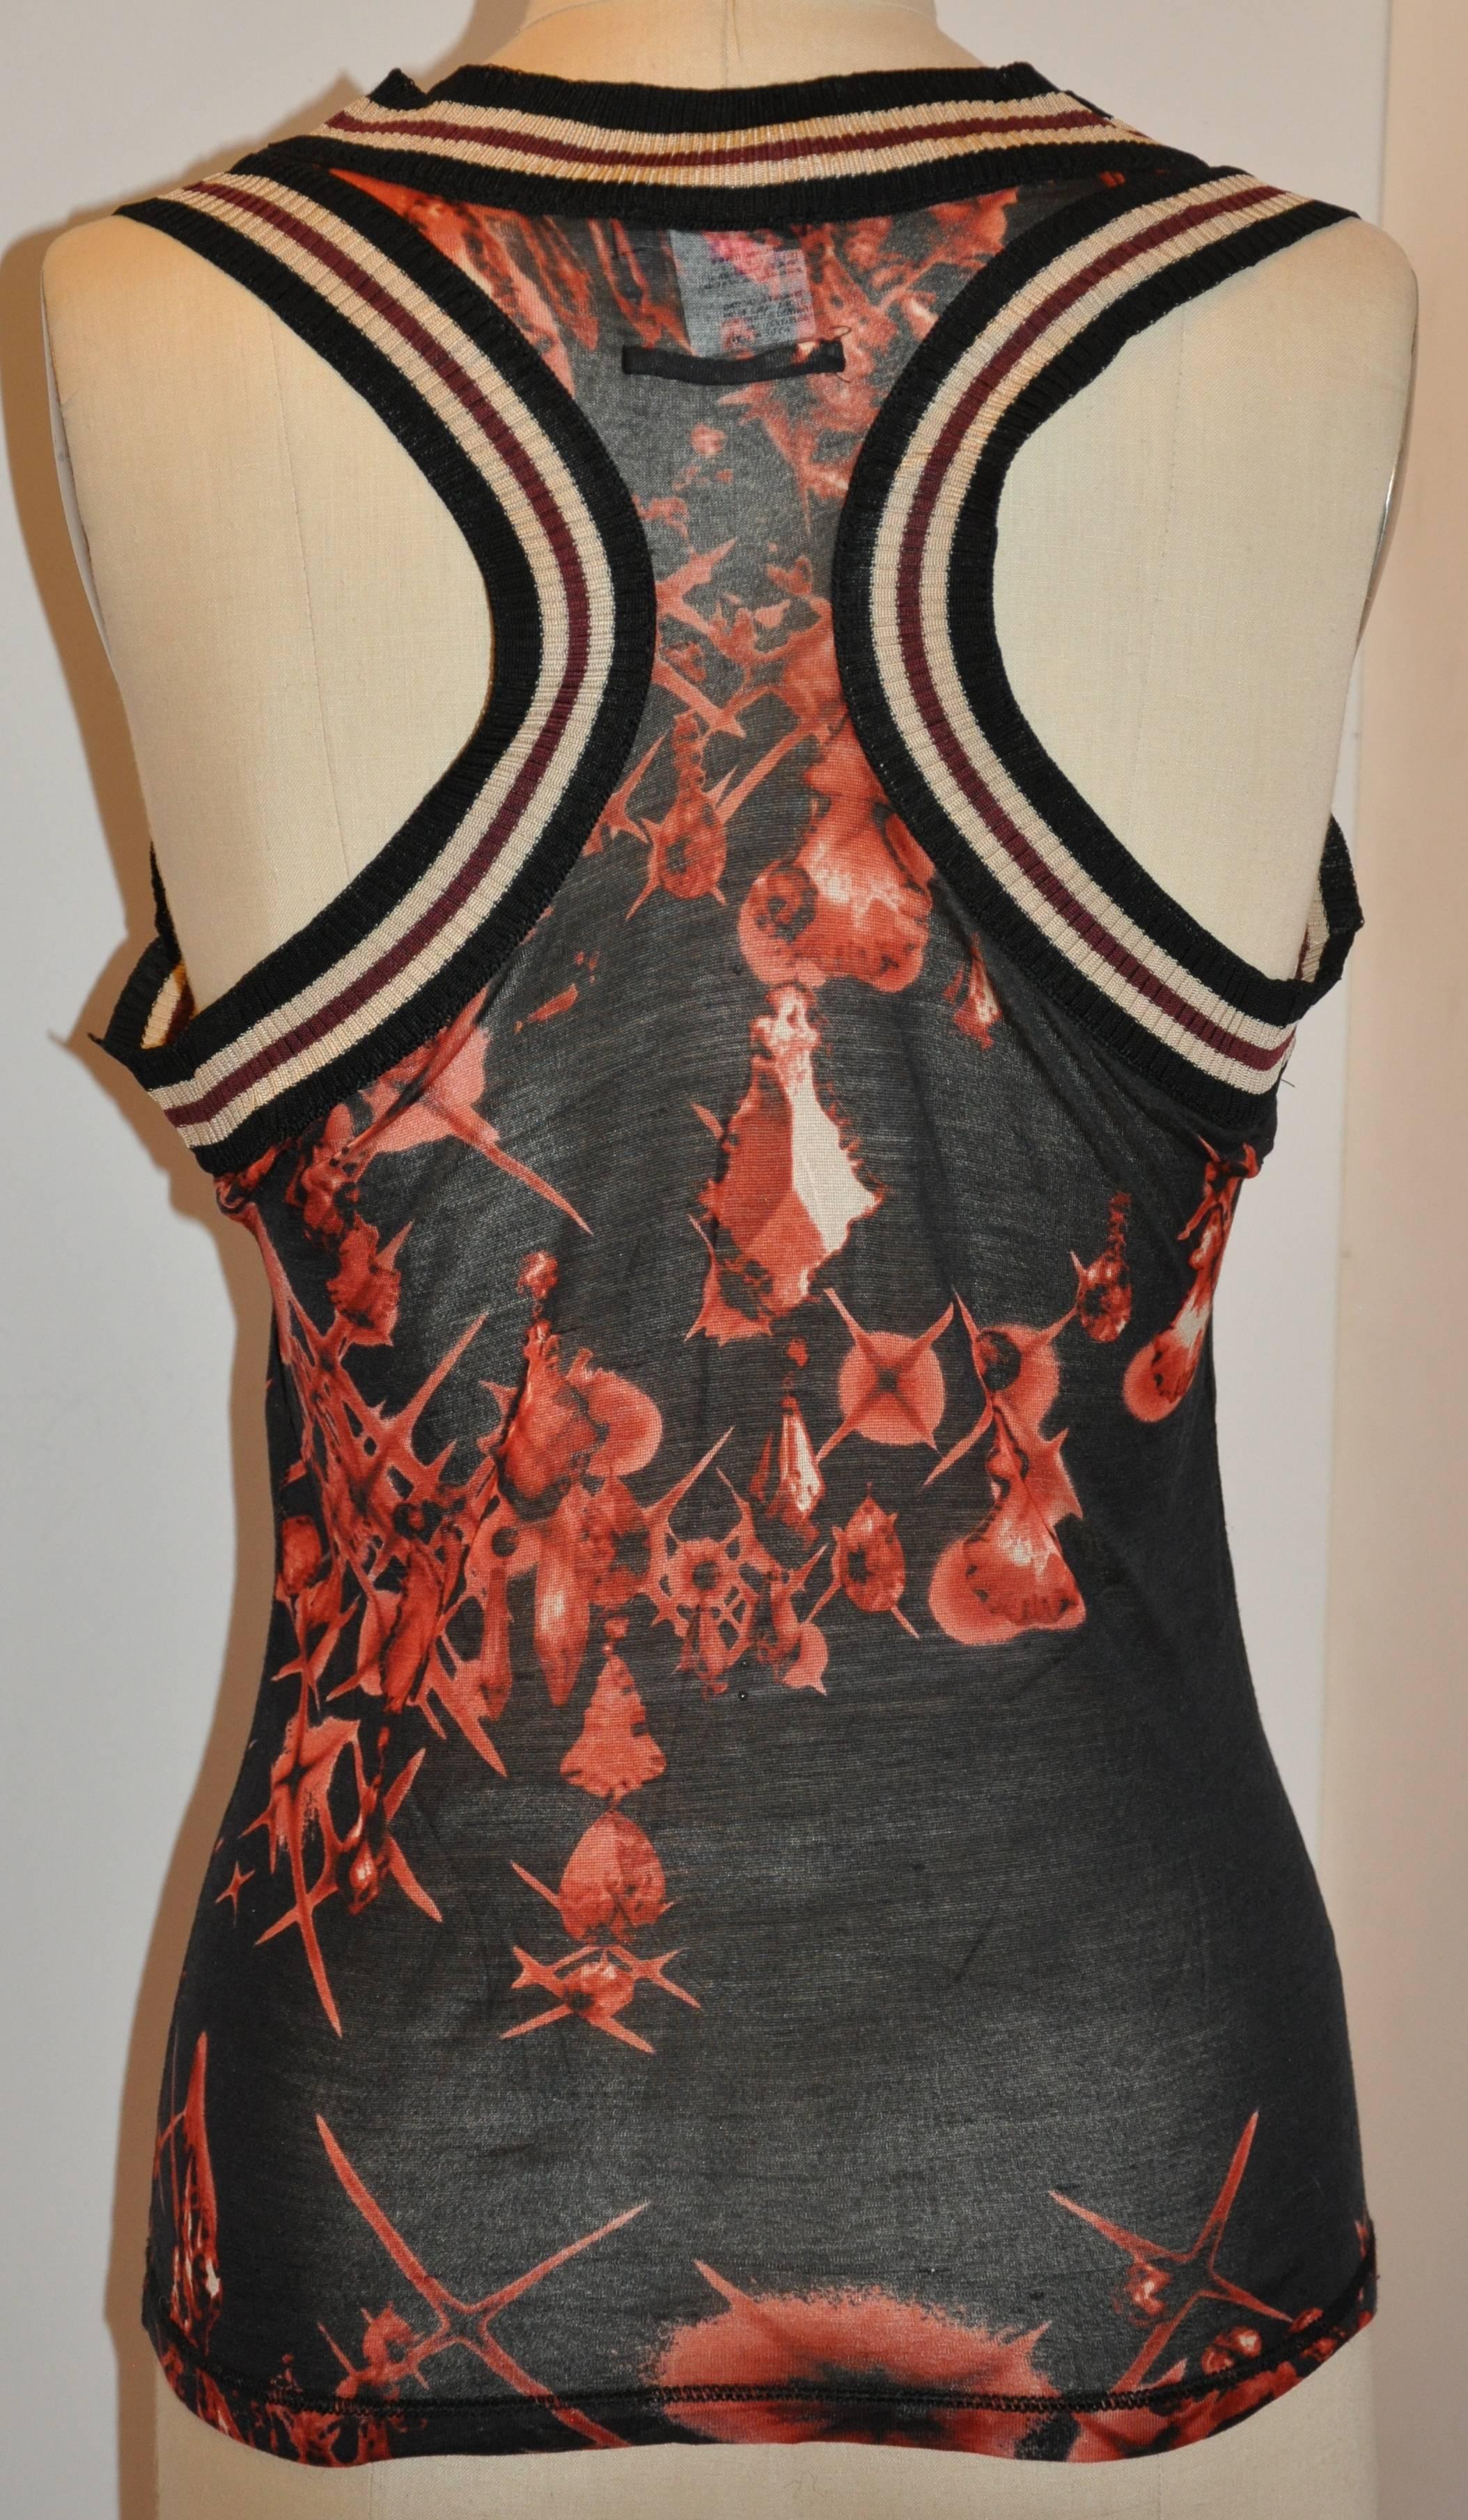        Jean Paul Gaultier's wonderful stretch Femme Malle Red and Black Racer's back top is detailed with a combination of black, cream, and burgundy stripe borders. the tank top wonderfully give a body-hugging fit where needed. The length measures